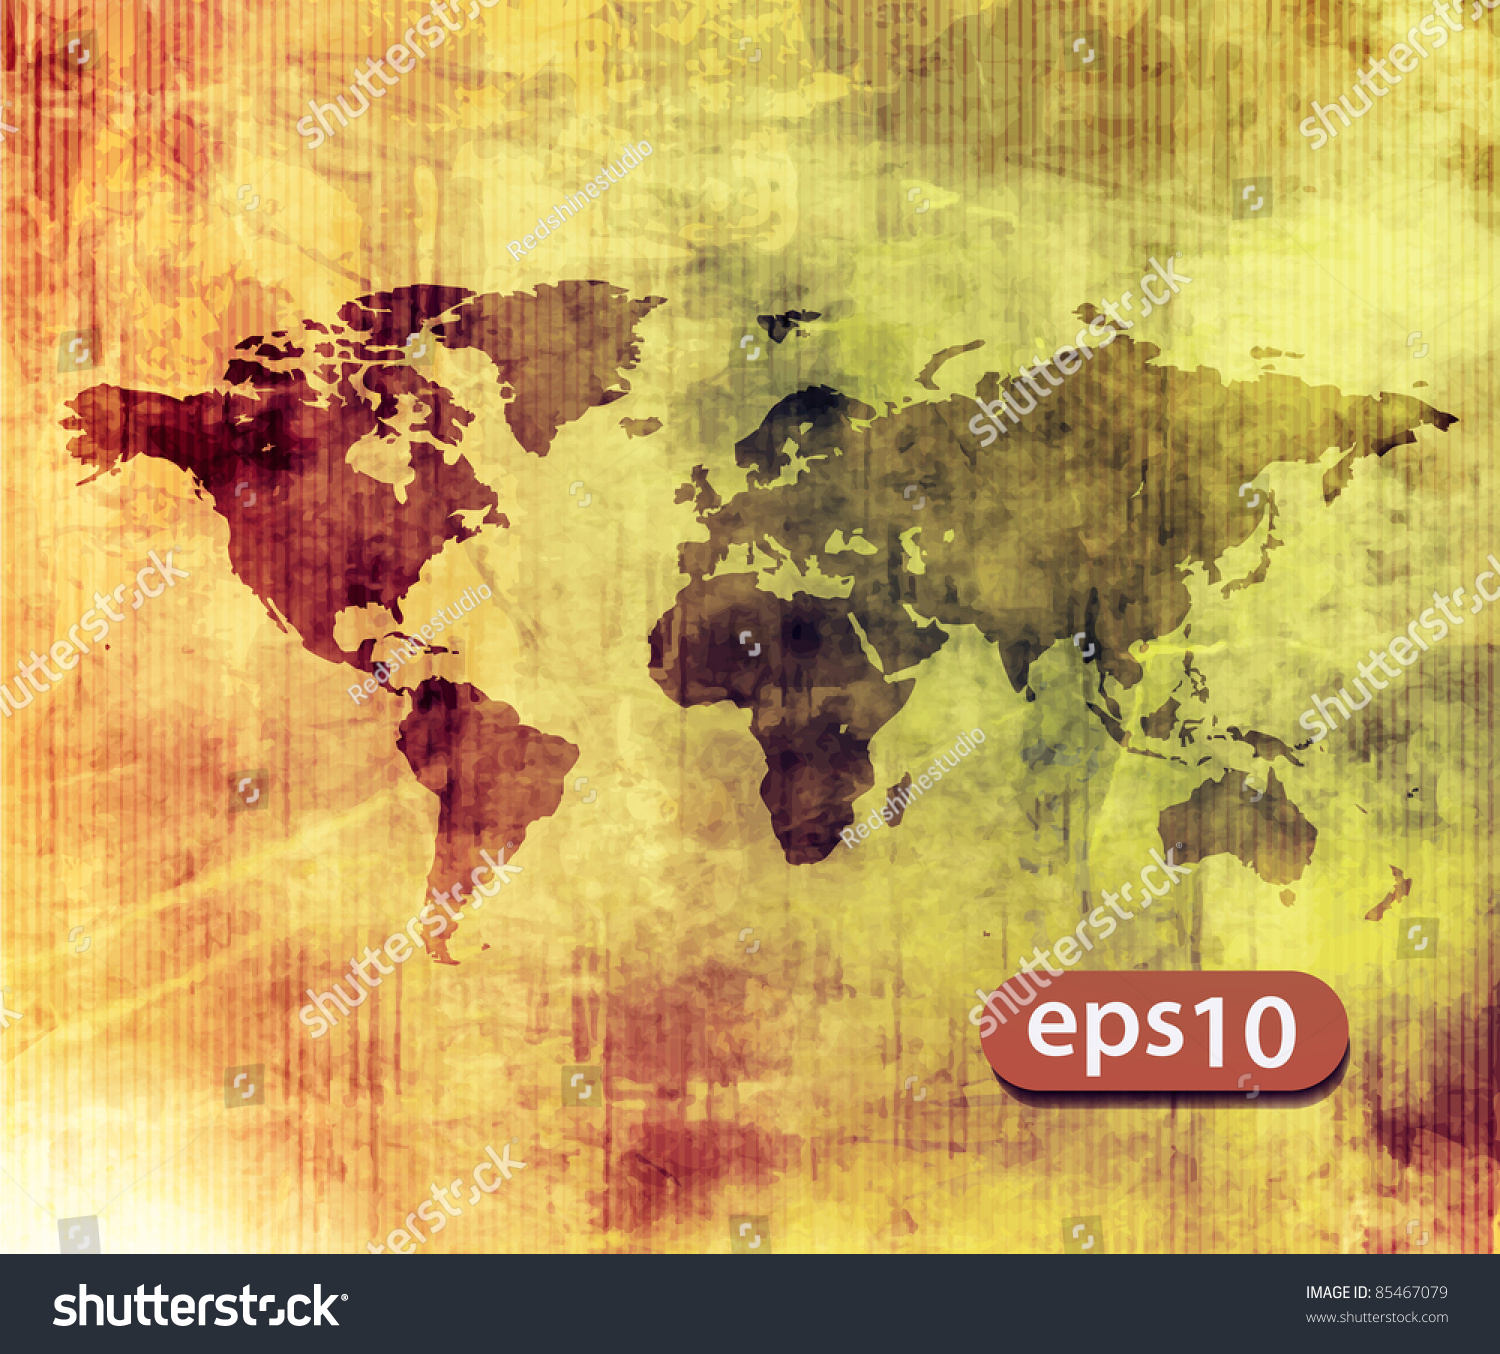 Vector Illustrated World Map With White Texture Background. - 85467079